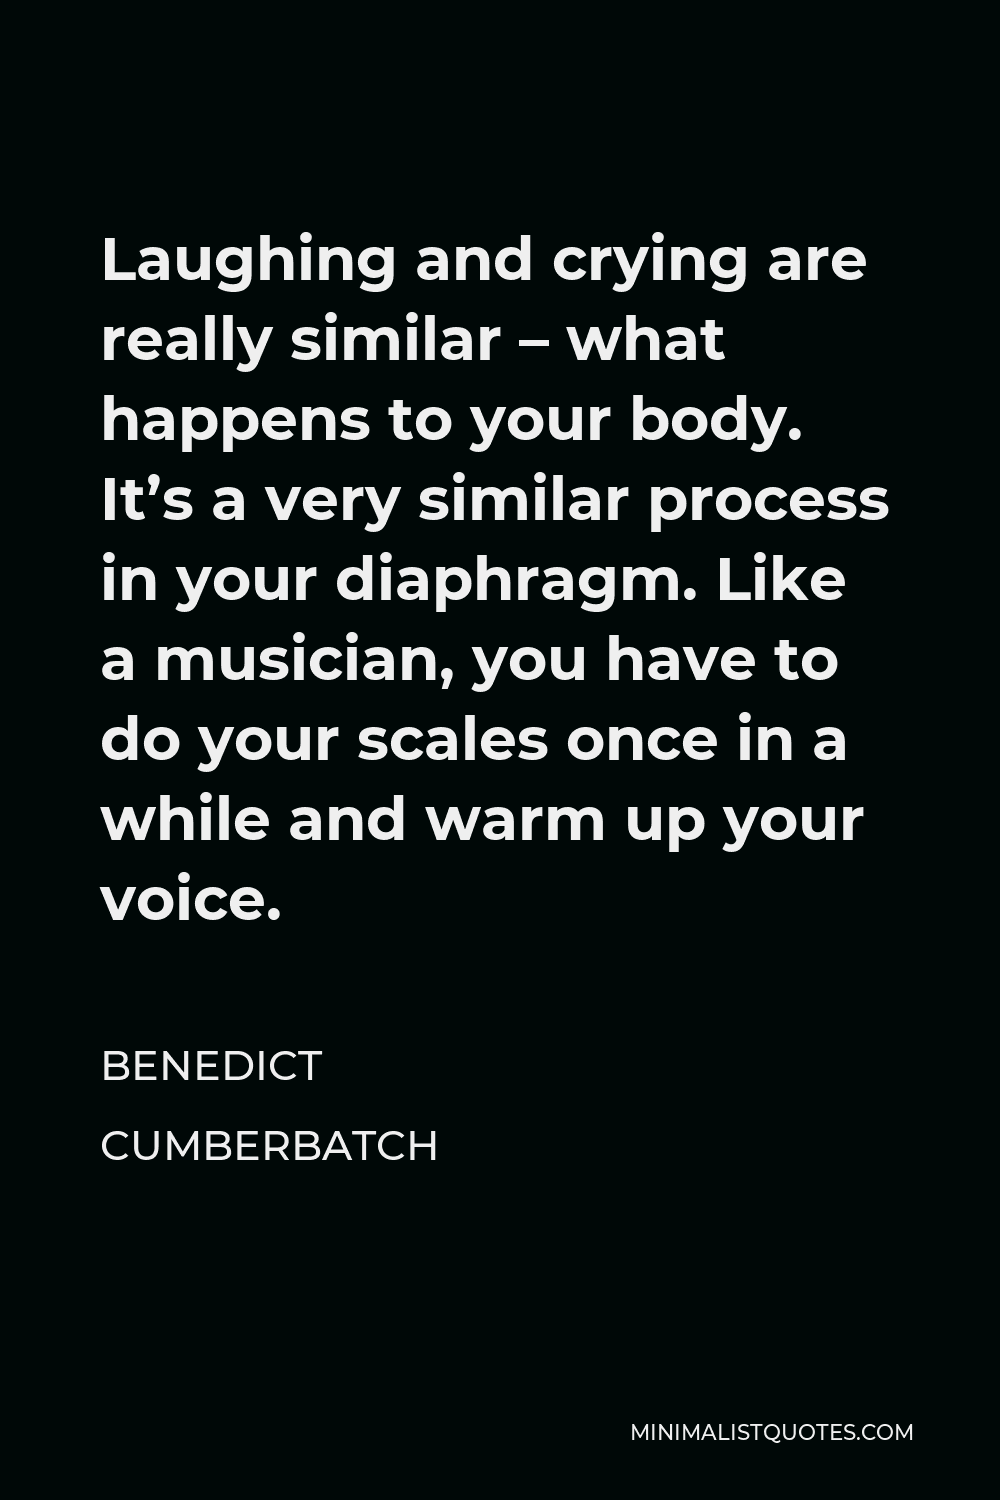 Benedict Cumberbatch Quote - Laughing and crying are really similar – what happens to your body. It’s a very similar process in your diaphragm. Like a musician, you have to do your scales once in a while and warm up your voice.